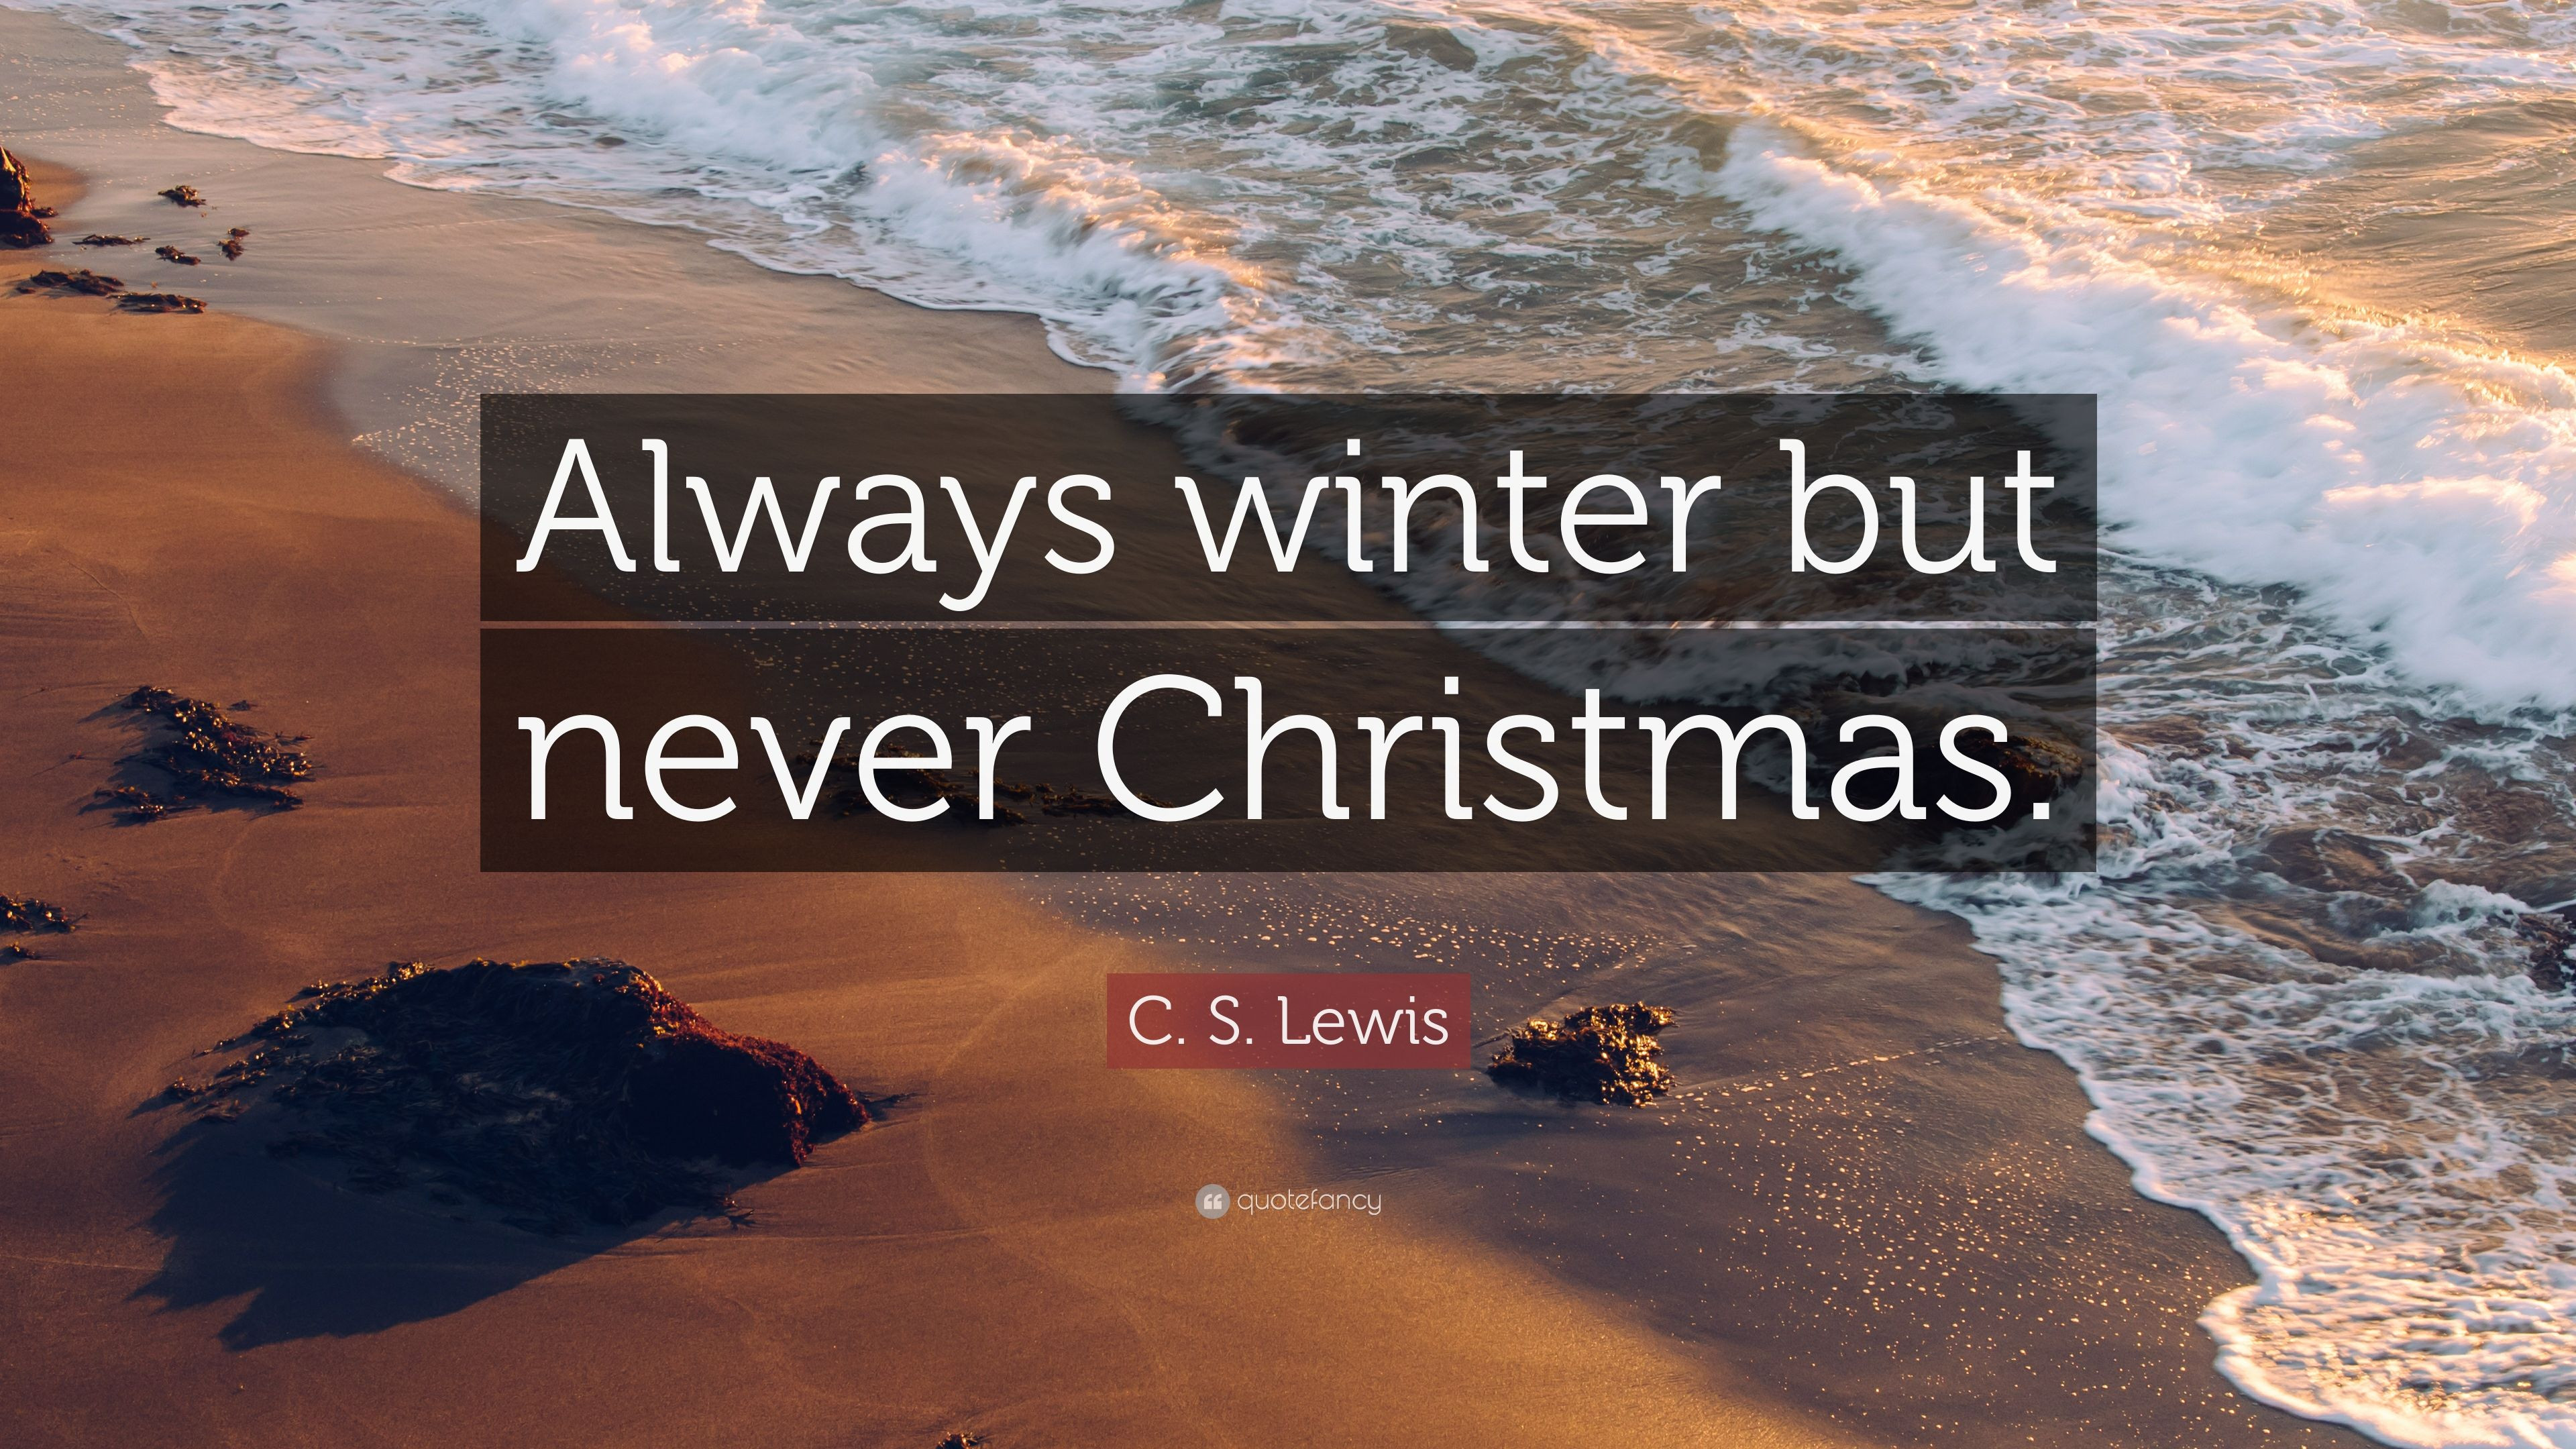 C.S.Lewis Christmas Quote
 C S Lewis Quote “Always winter but never Christmas